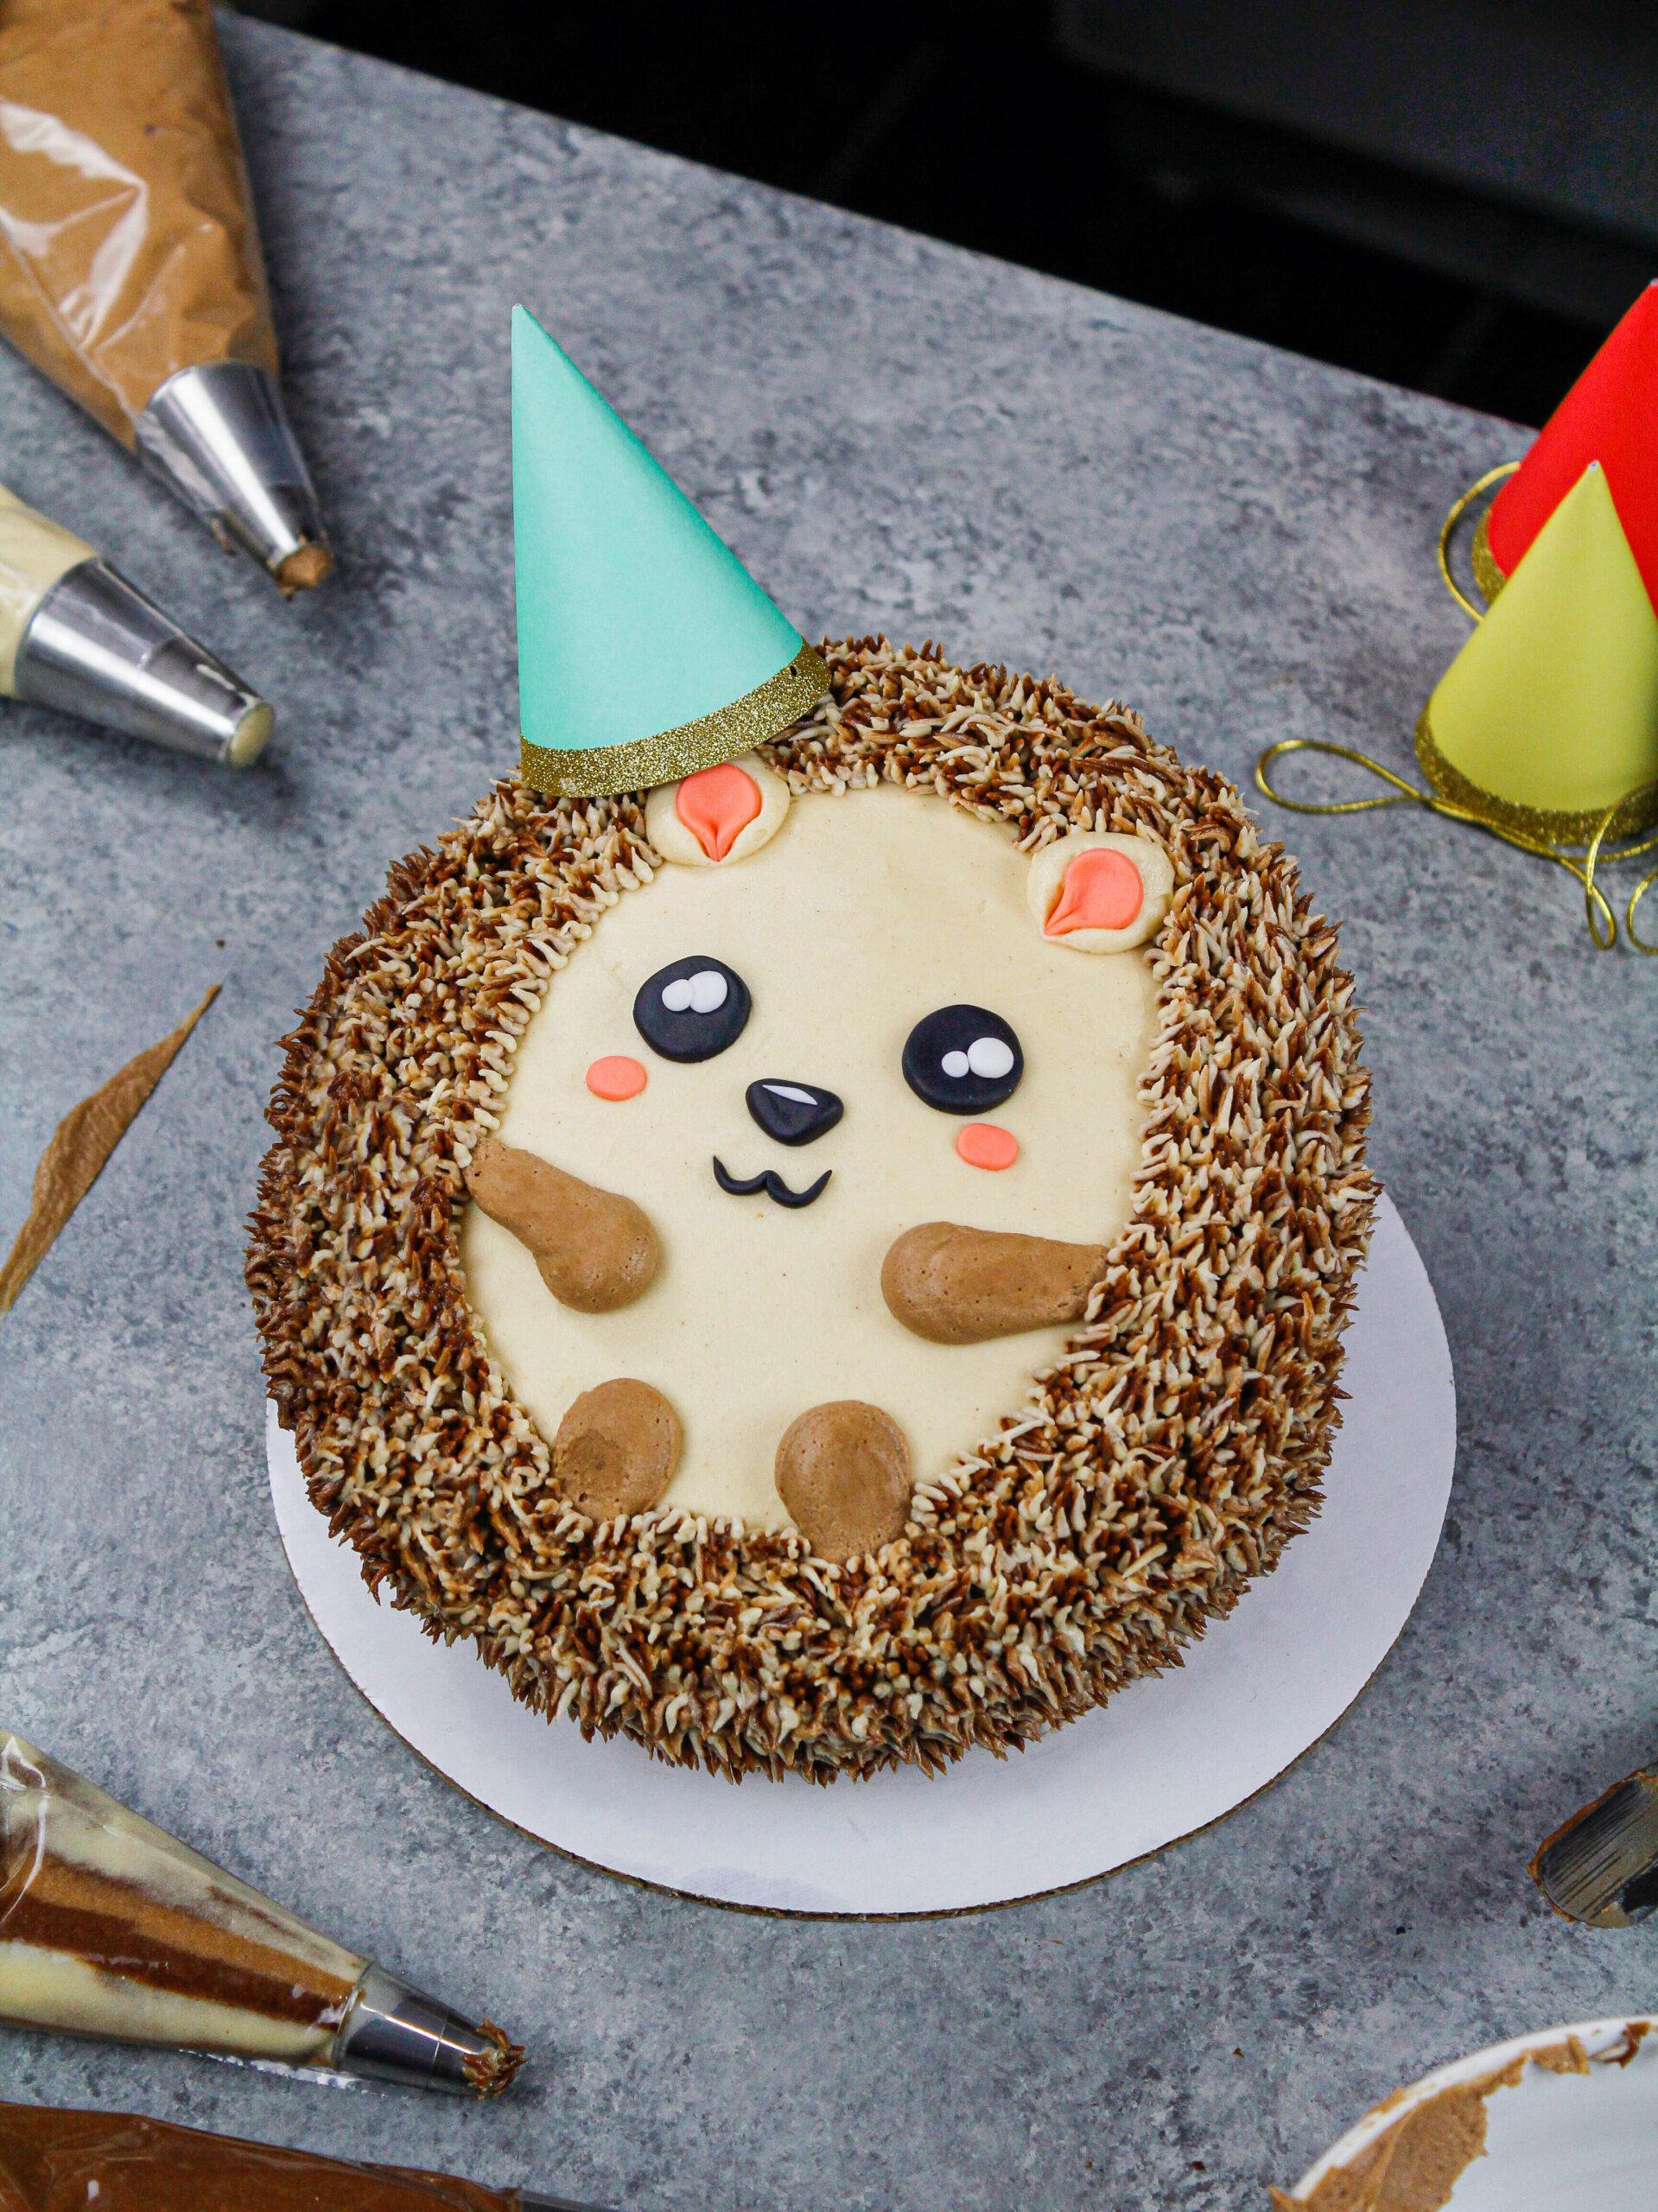 image of an adorable and easy to make hedgehog cake made with chocolate cake layers and buttercream frosting